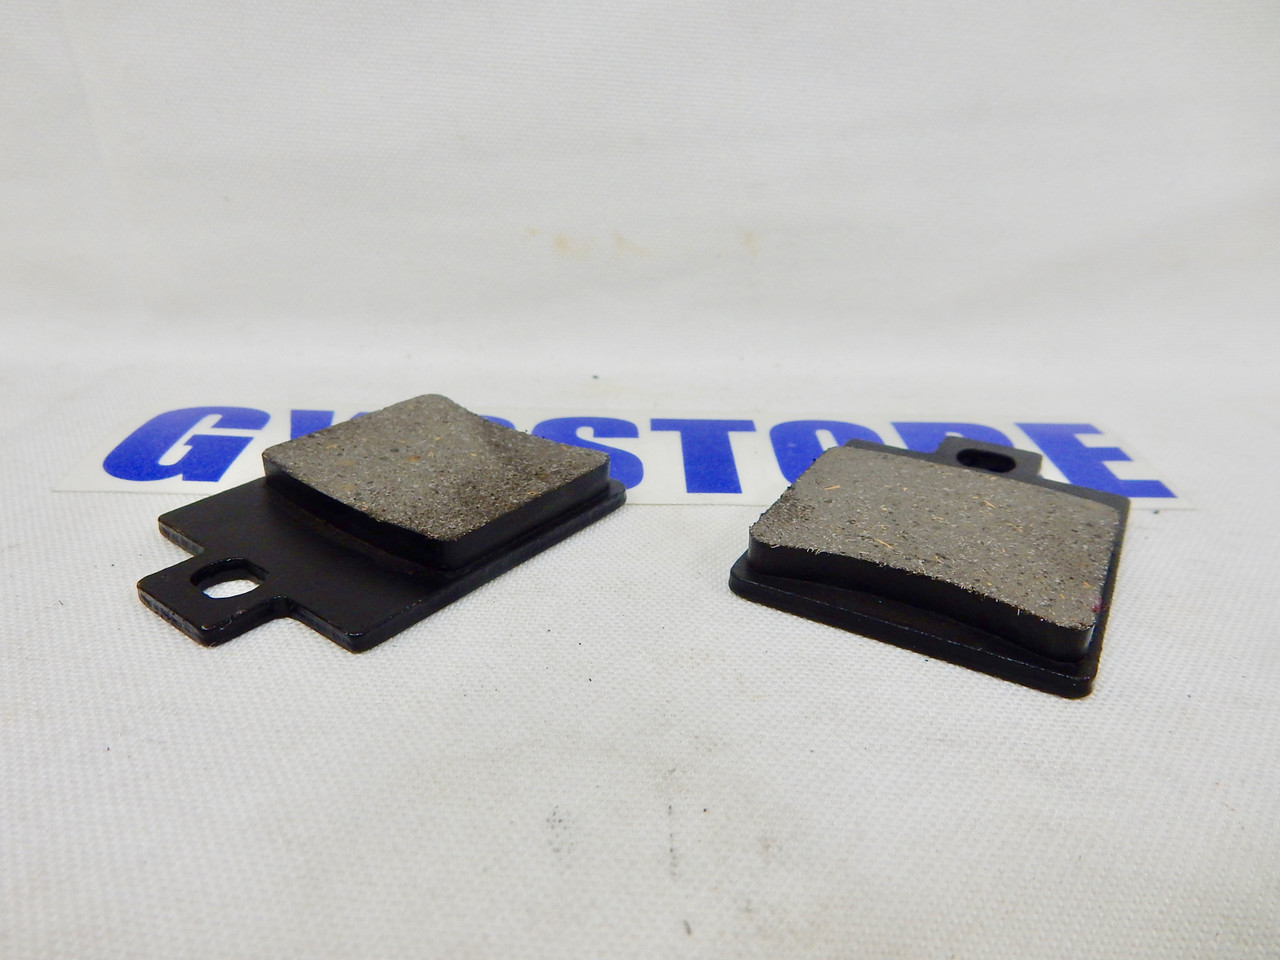 DISC BRAKE PAD SET FOR 50cc QMB139 AND 150cc GY6 SCOOTERS ATV BIKE (TYPE 6)